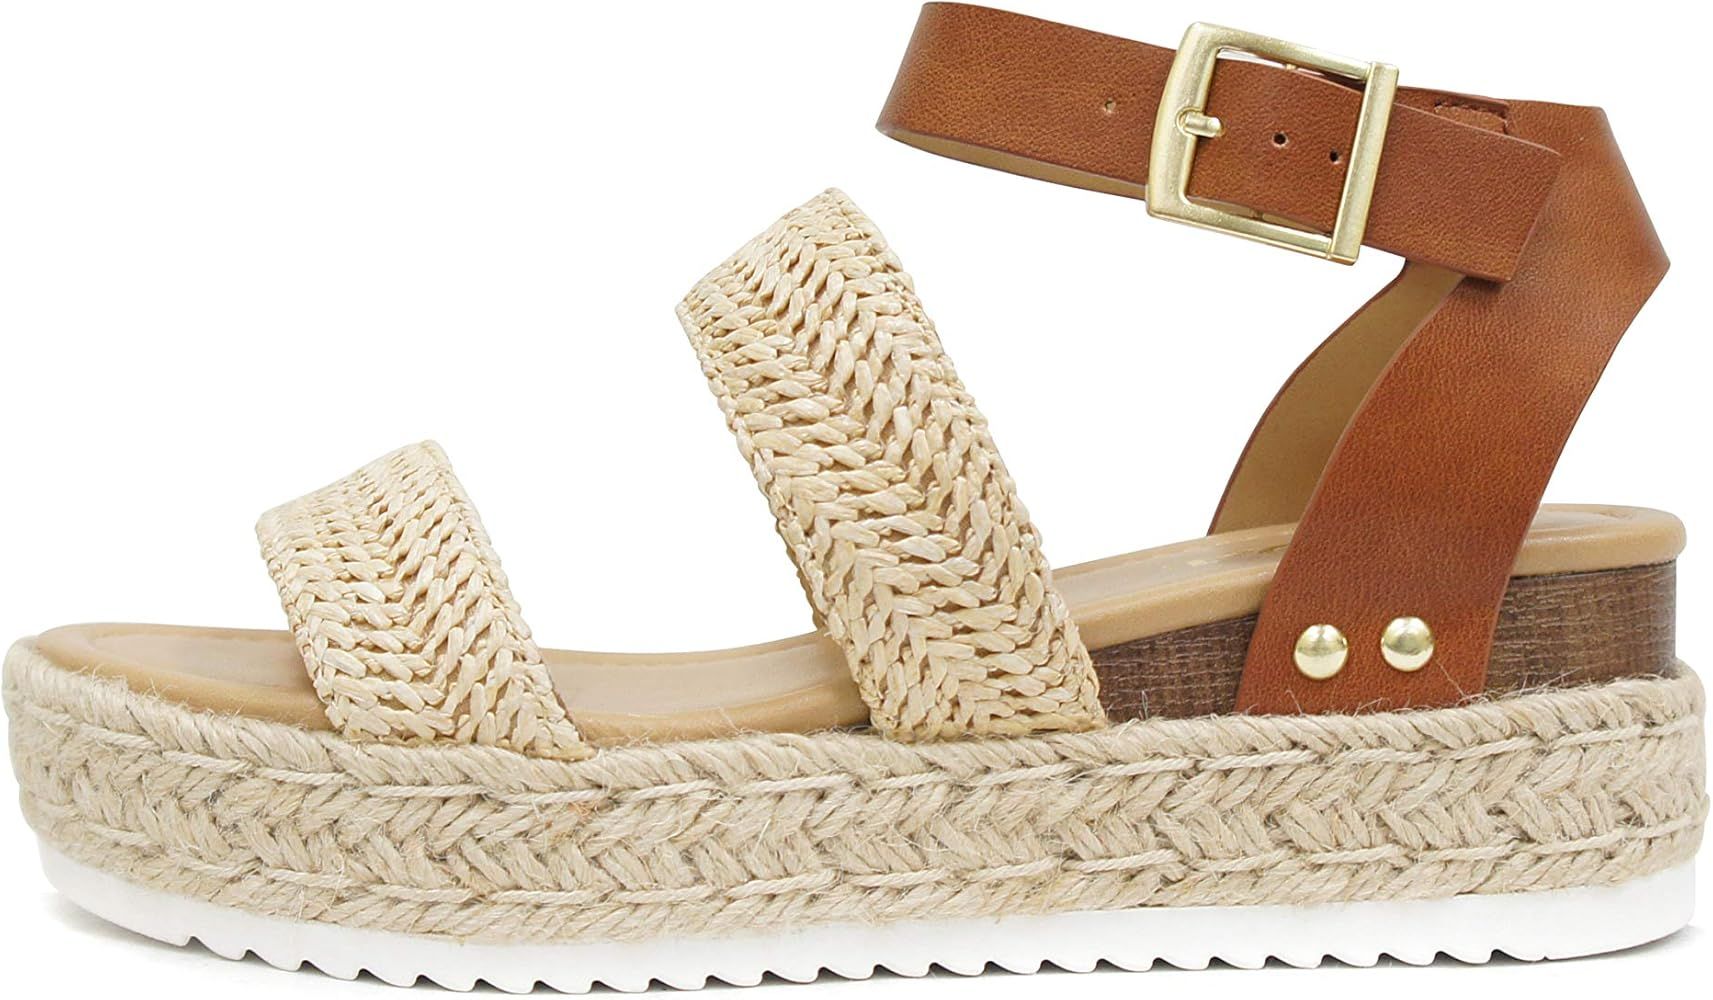 Soda Women's Topic Open Toe Buckle Ankle Strap Espadrille Synthetic sandals | Amazon (US)